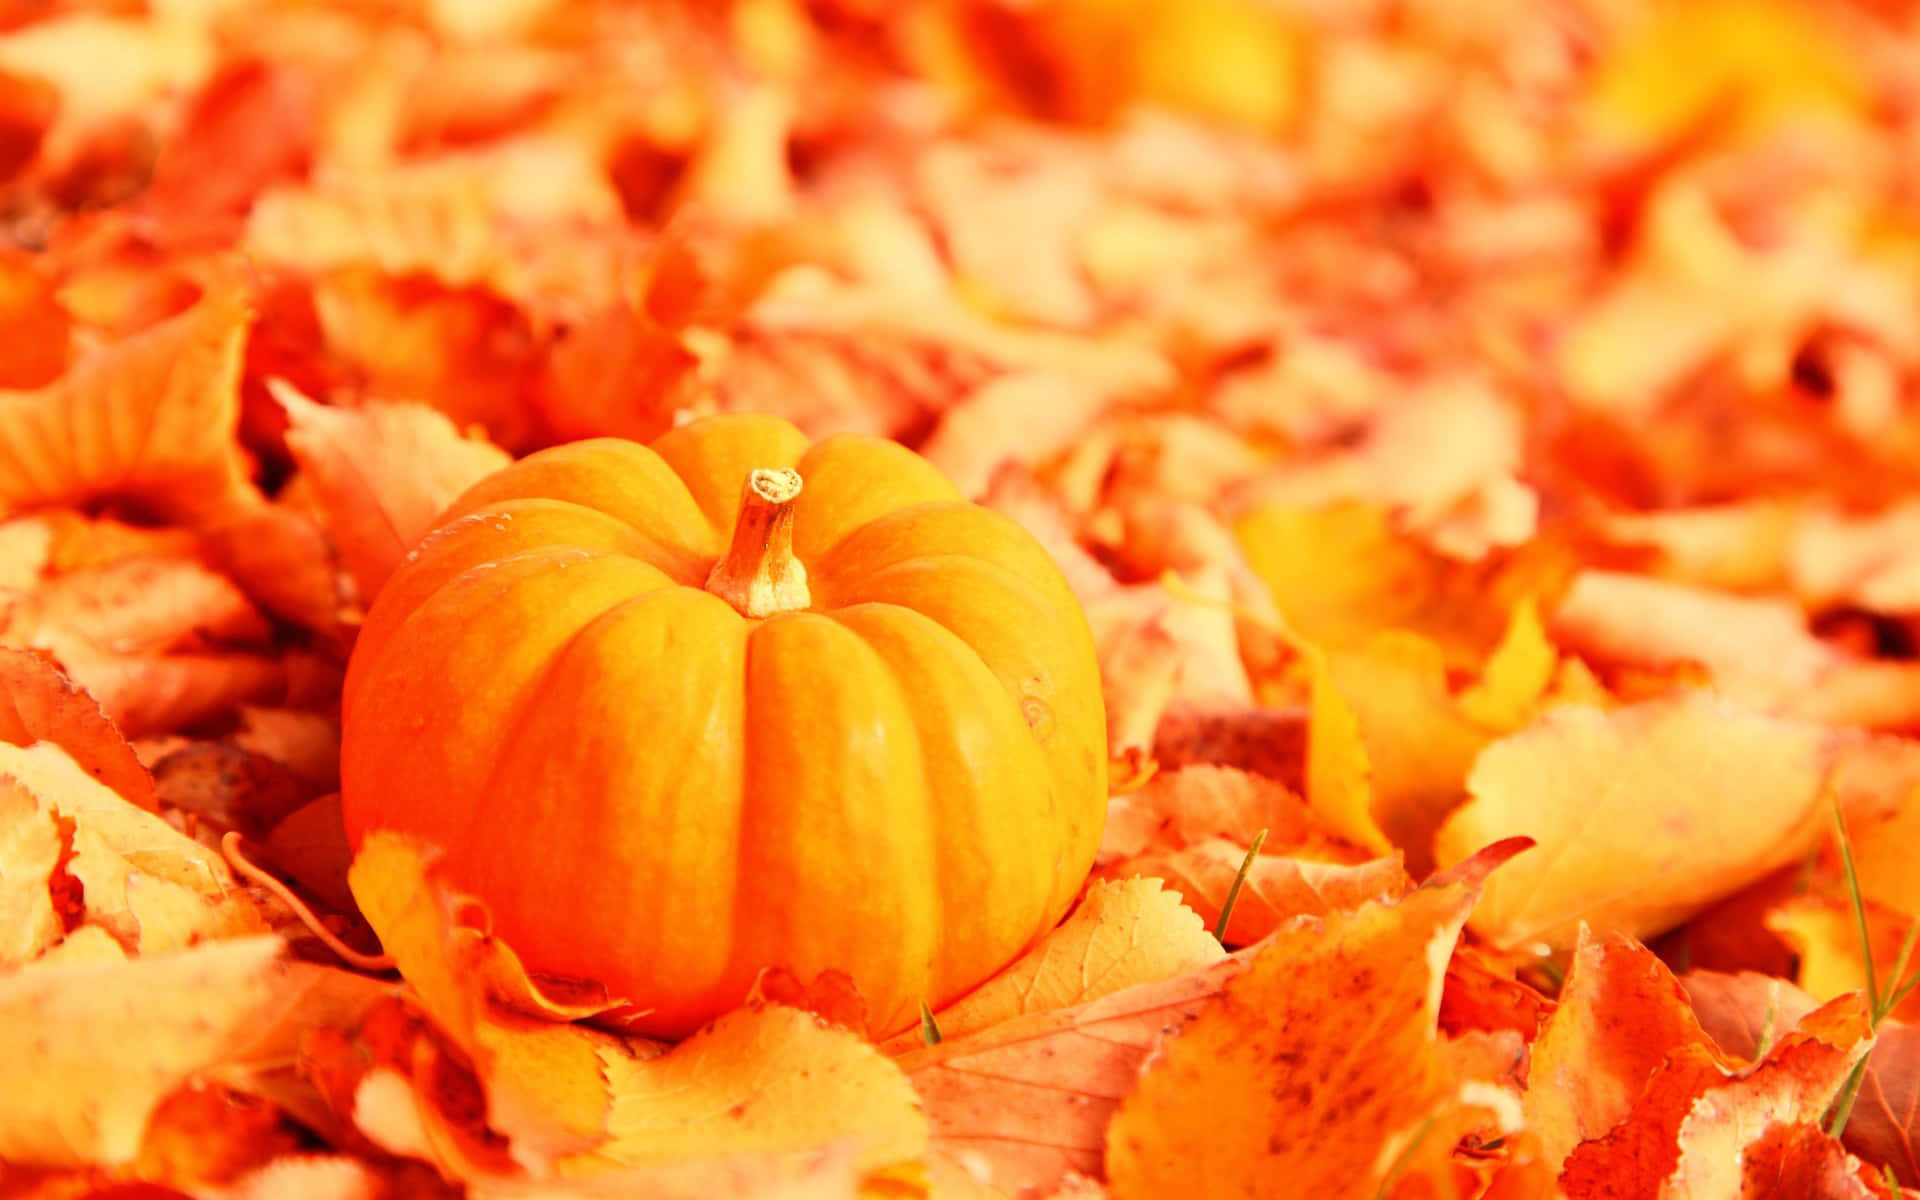 Enjoy the Fall season with this rustic pumpkin on a wooden background. Wallpaper